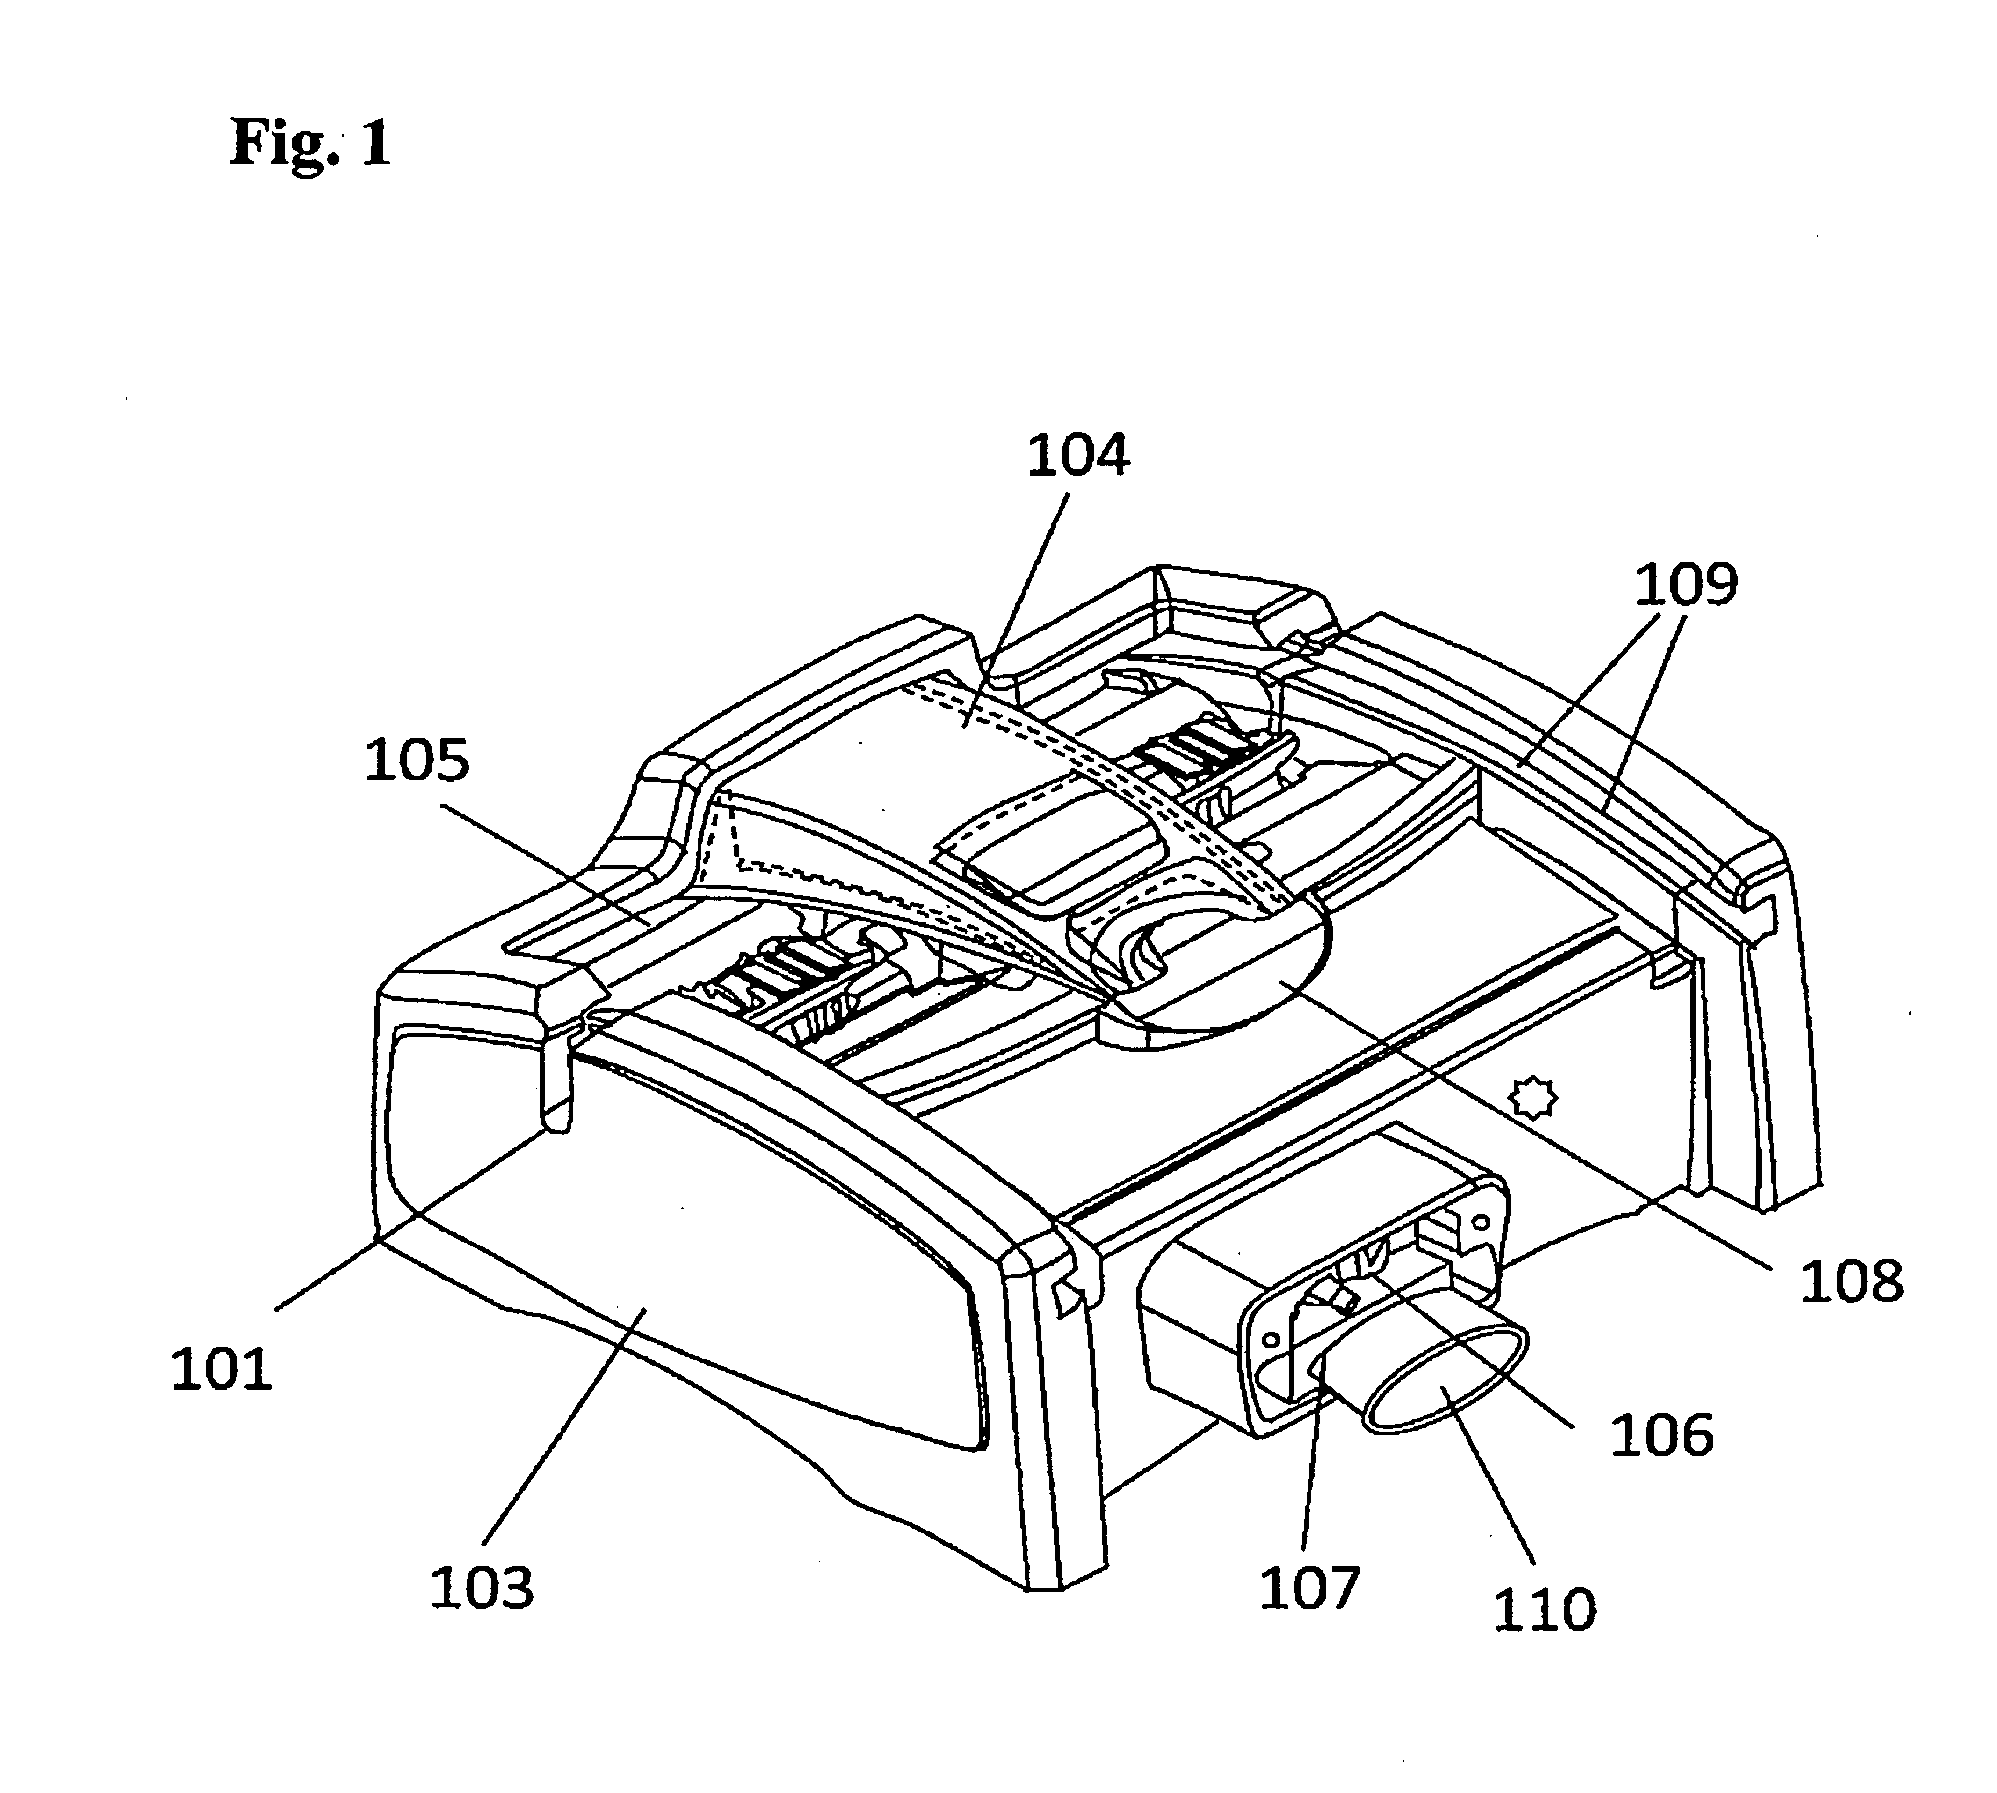 Explosion proof fusion splicer for optical fibers